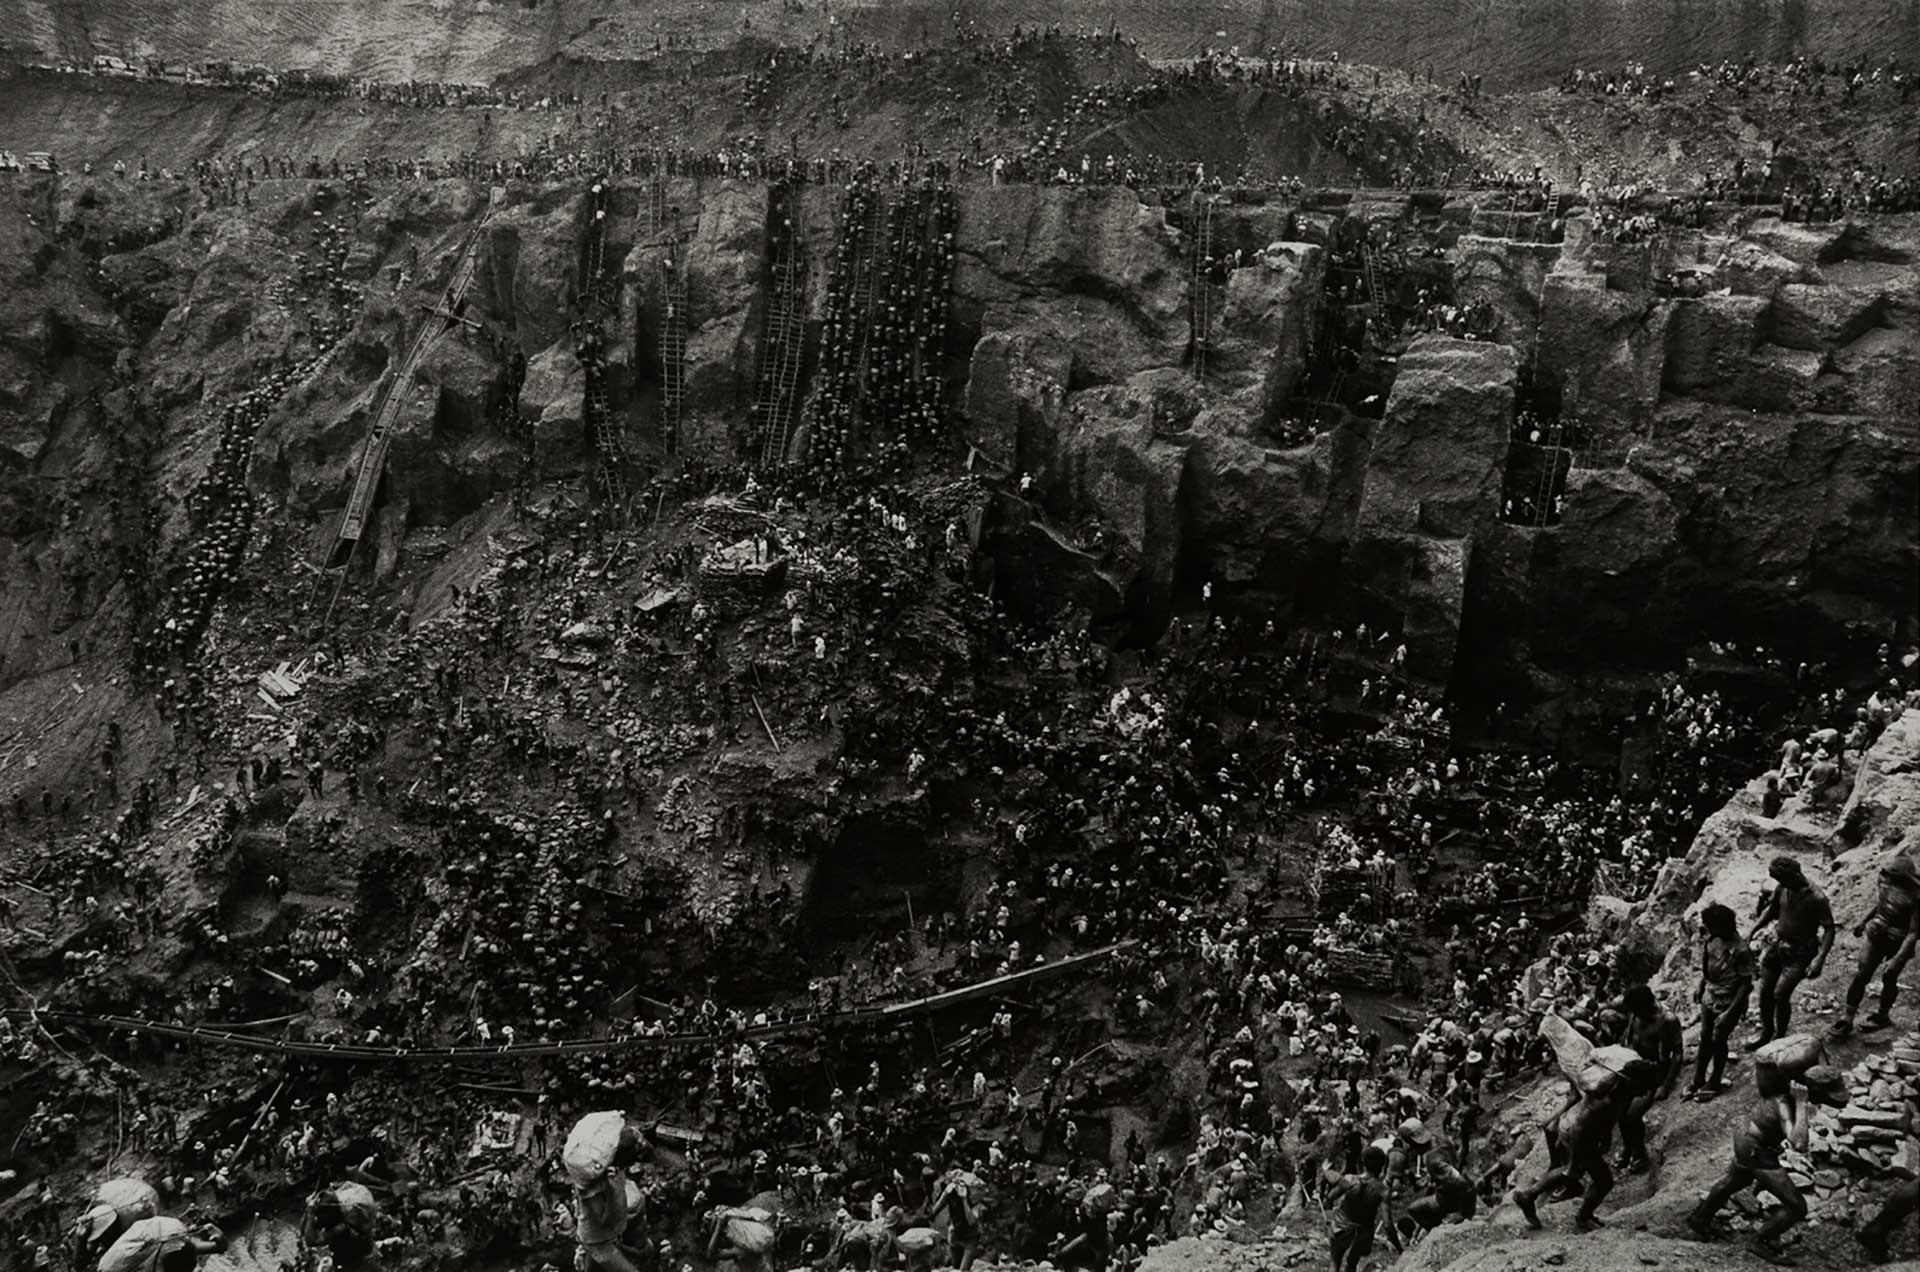 An aerial view of a huge crowd of people working in a mine. Makeshift ladders, bridges and people carrying heavy sacks are seen.